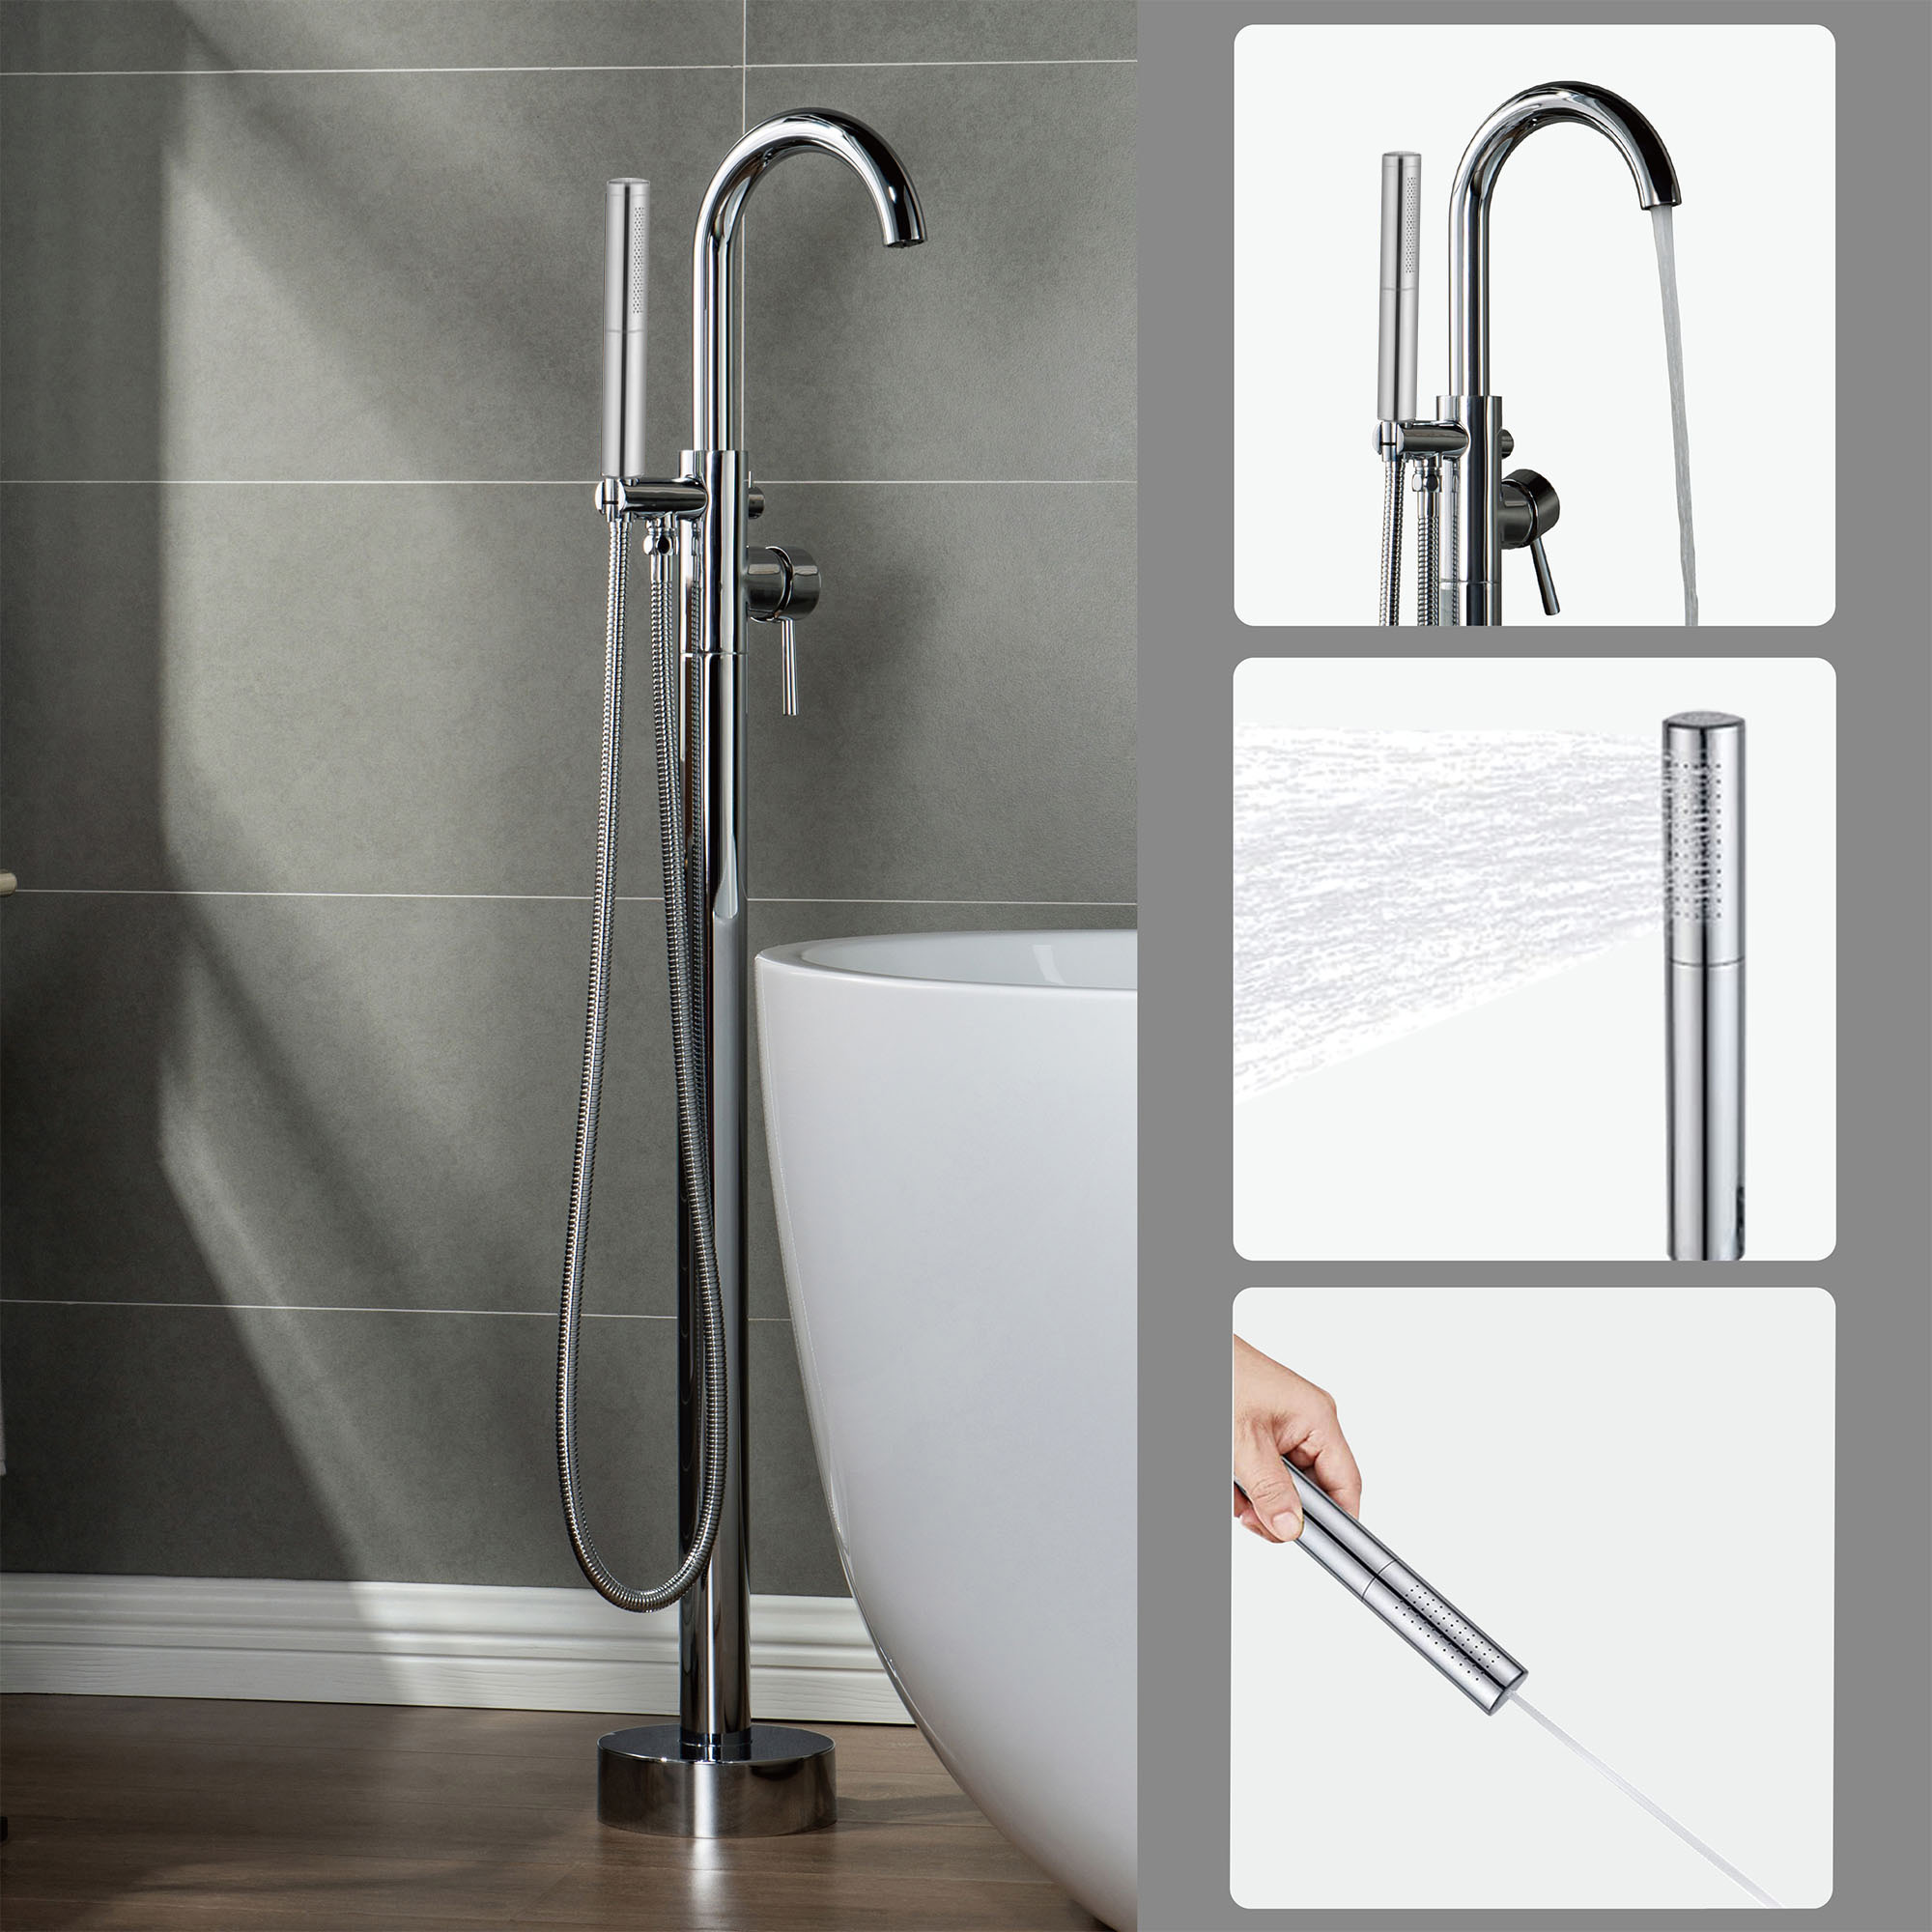 WOODBRIDGE F0002CHDR Contemporary Single Handle Floor Mount Freestanding Tub Filler Faucet with Hand shower in Chrome Finish.